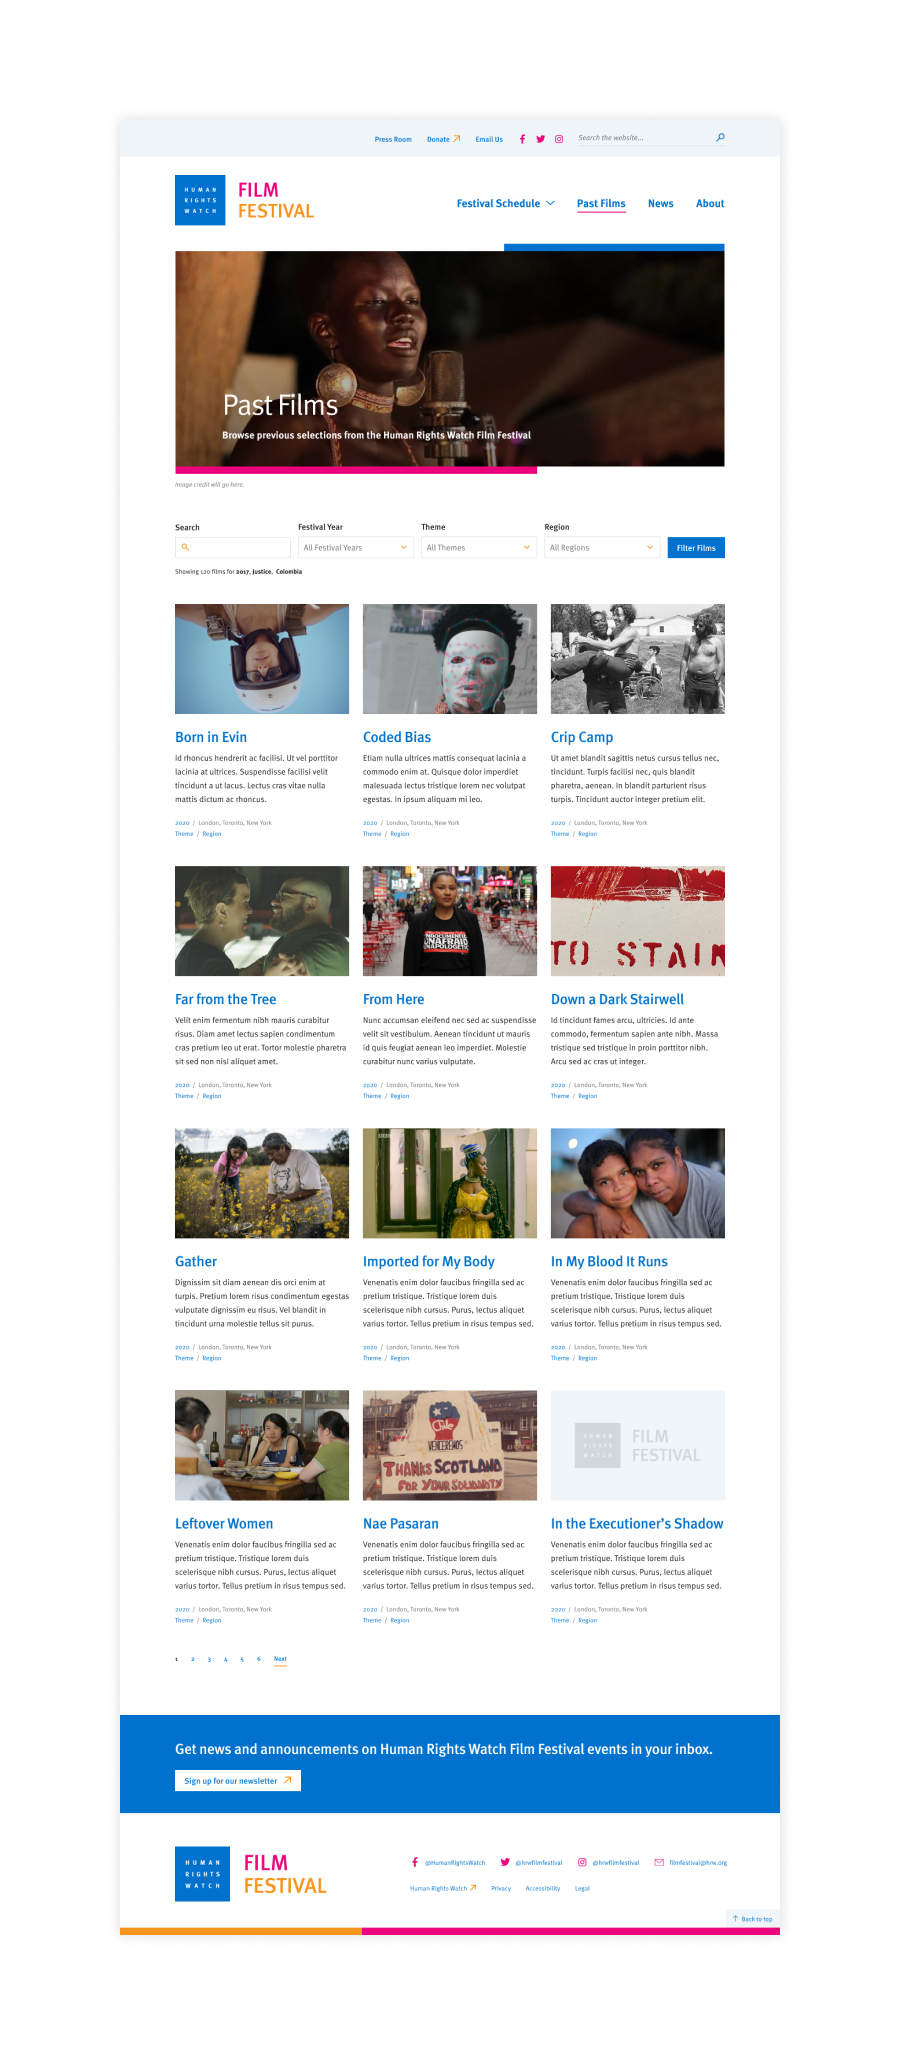 A screenshot of the ff.hrw.org website's past films page showing a filterable list of films